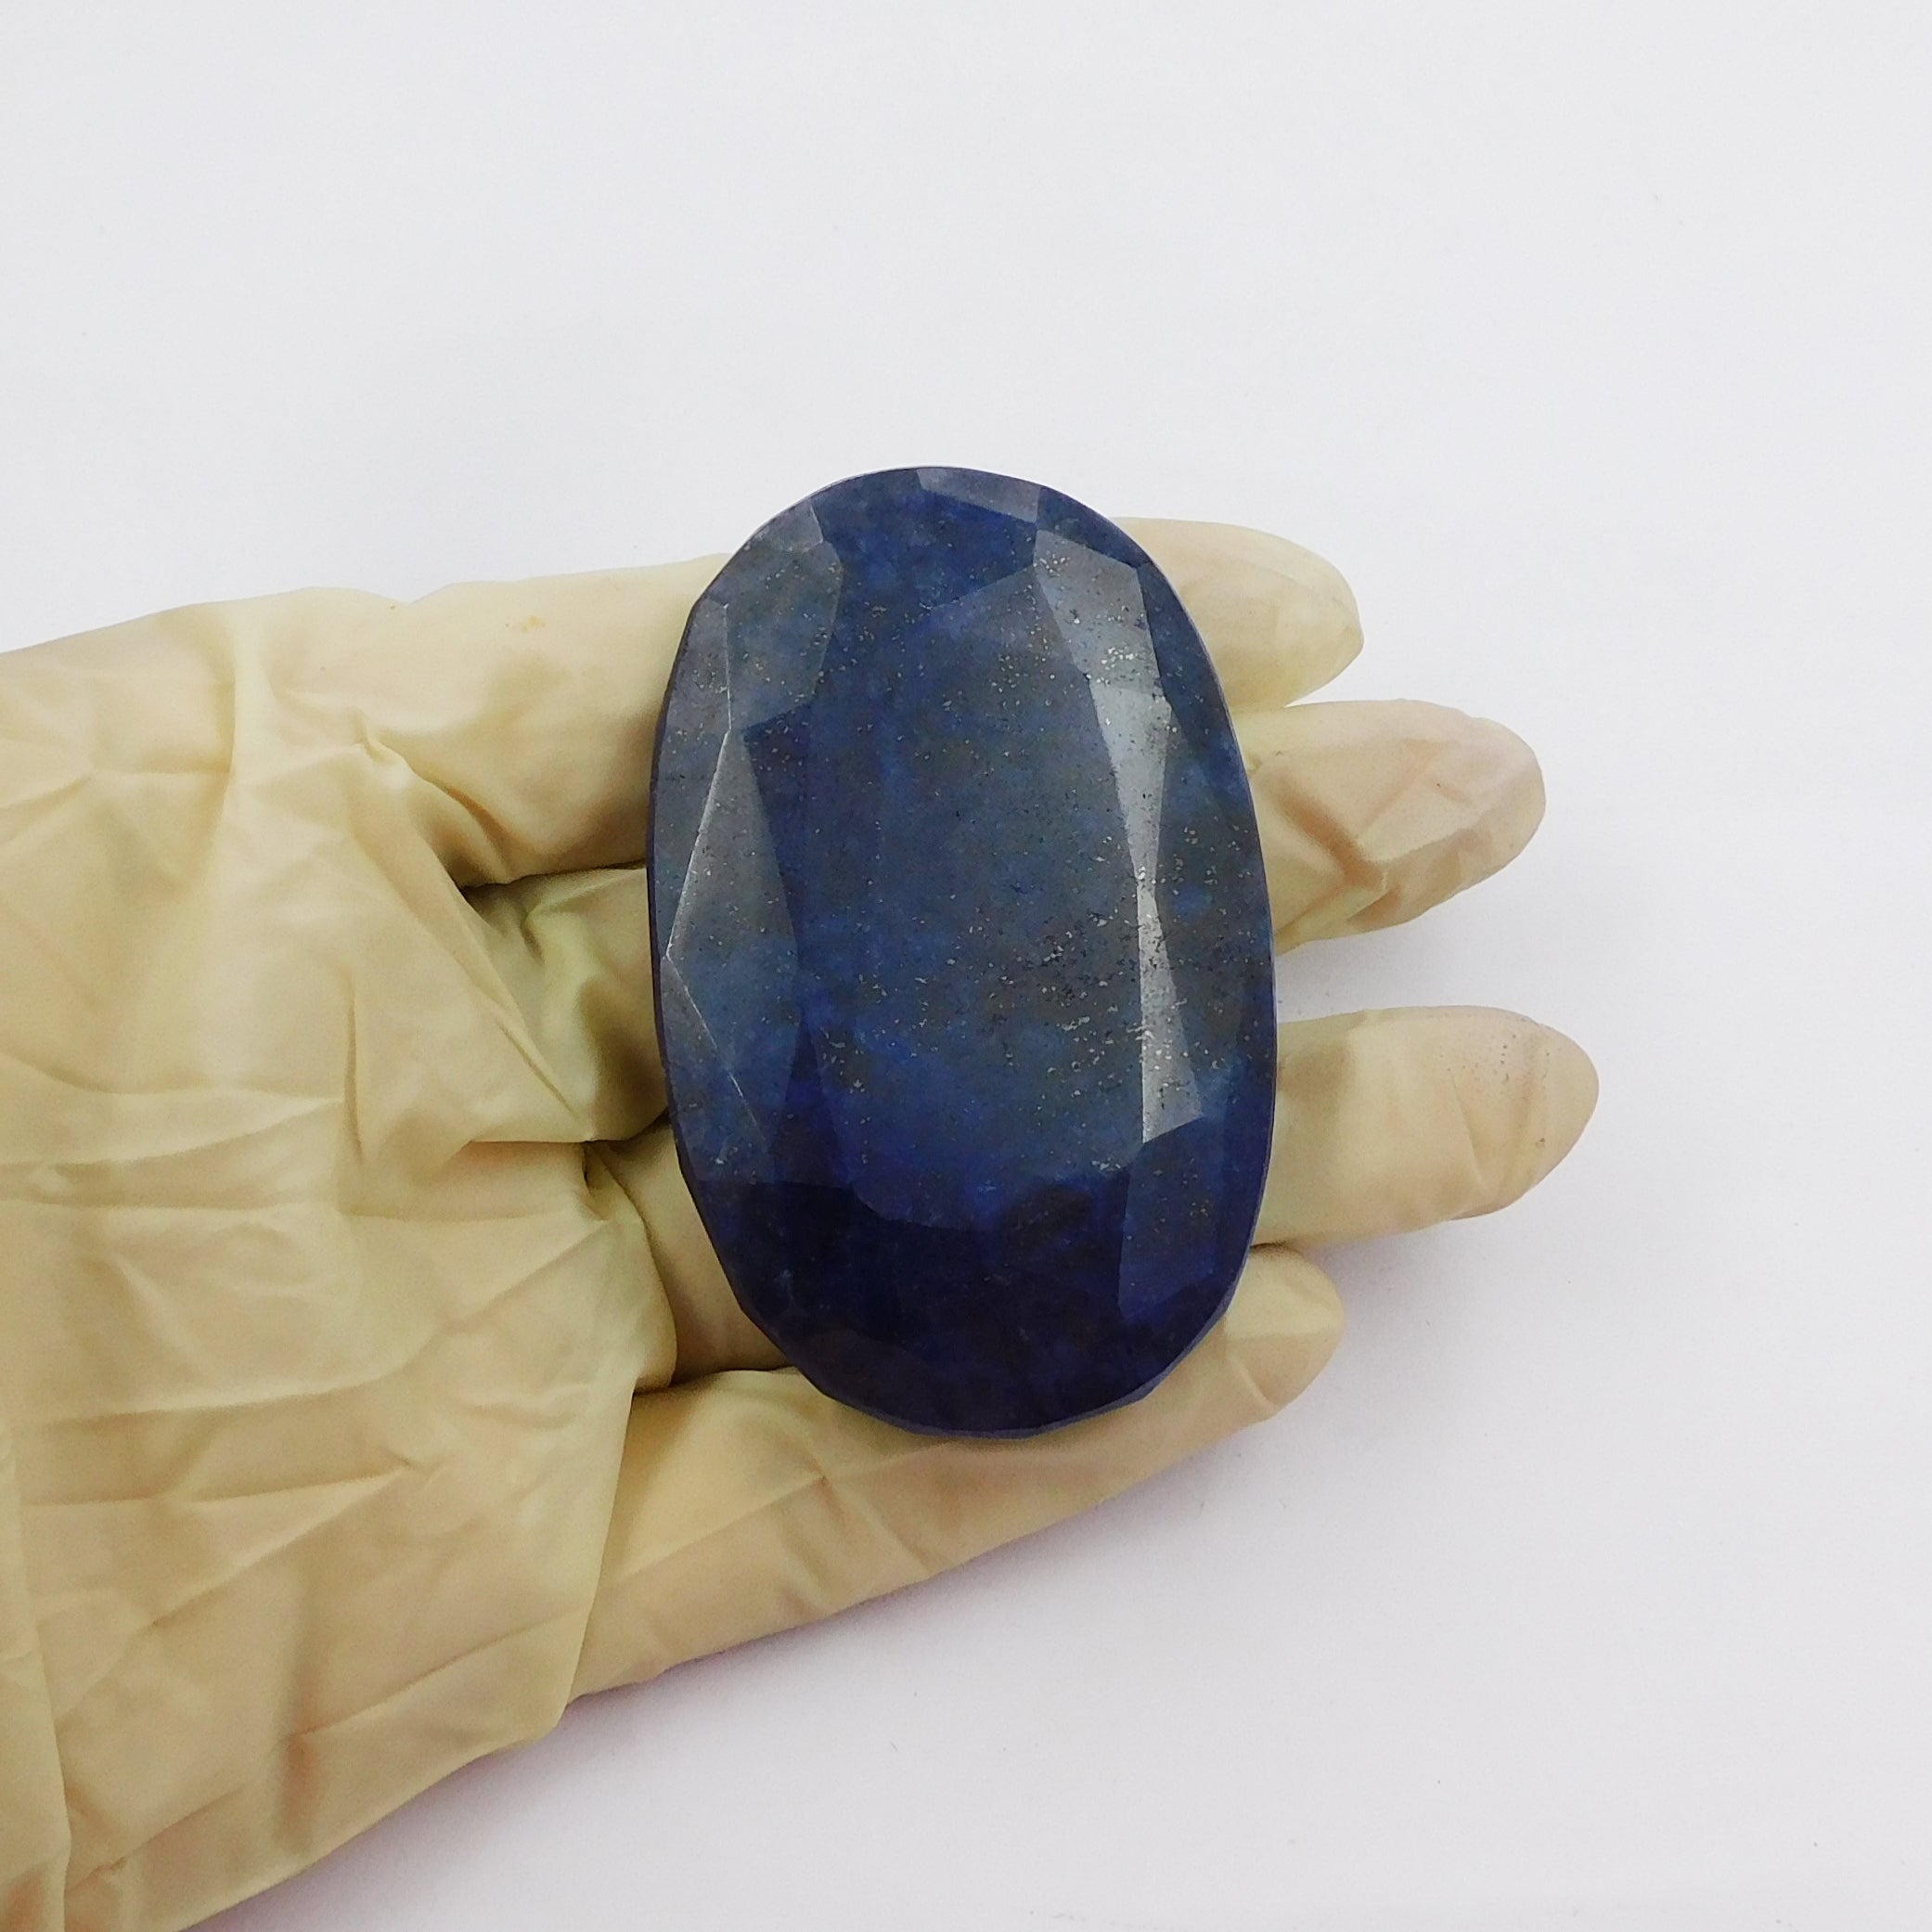 Unique Quality Exclusive Rare Collection Sapphire 540.60 Carat Blue Sapphire Stone faceted Oval Shape Stone Certified Natural Loose Gemstone Sapphire Help to bring good luck and success